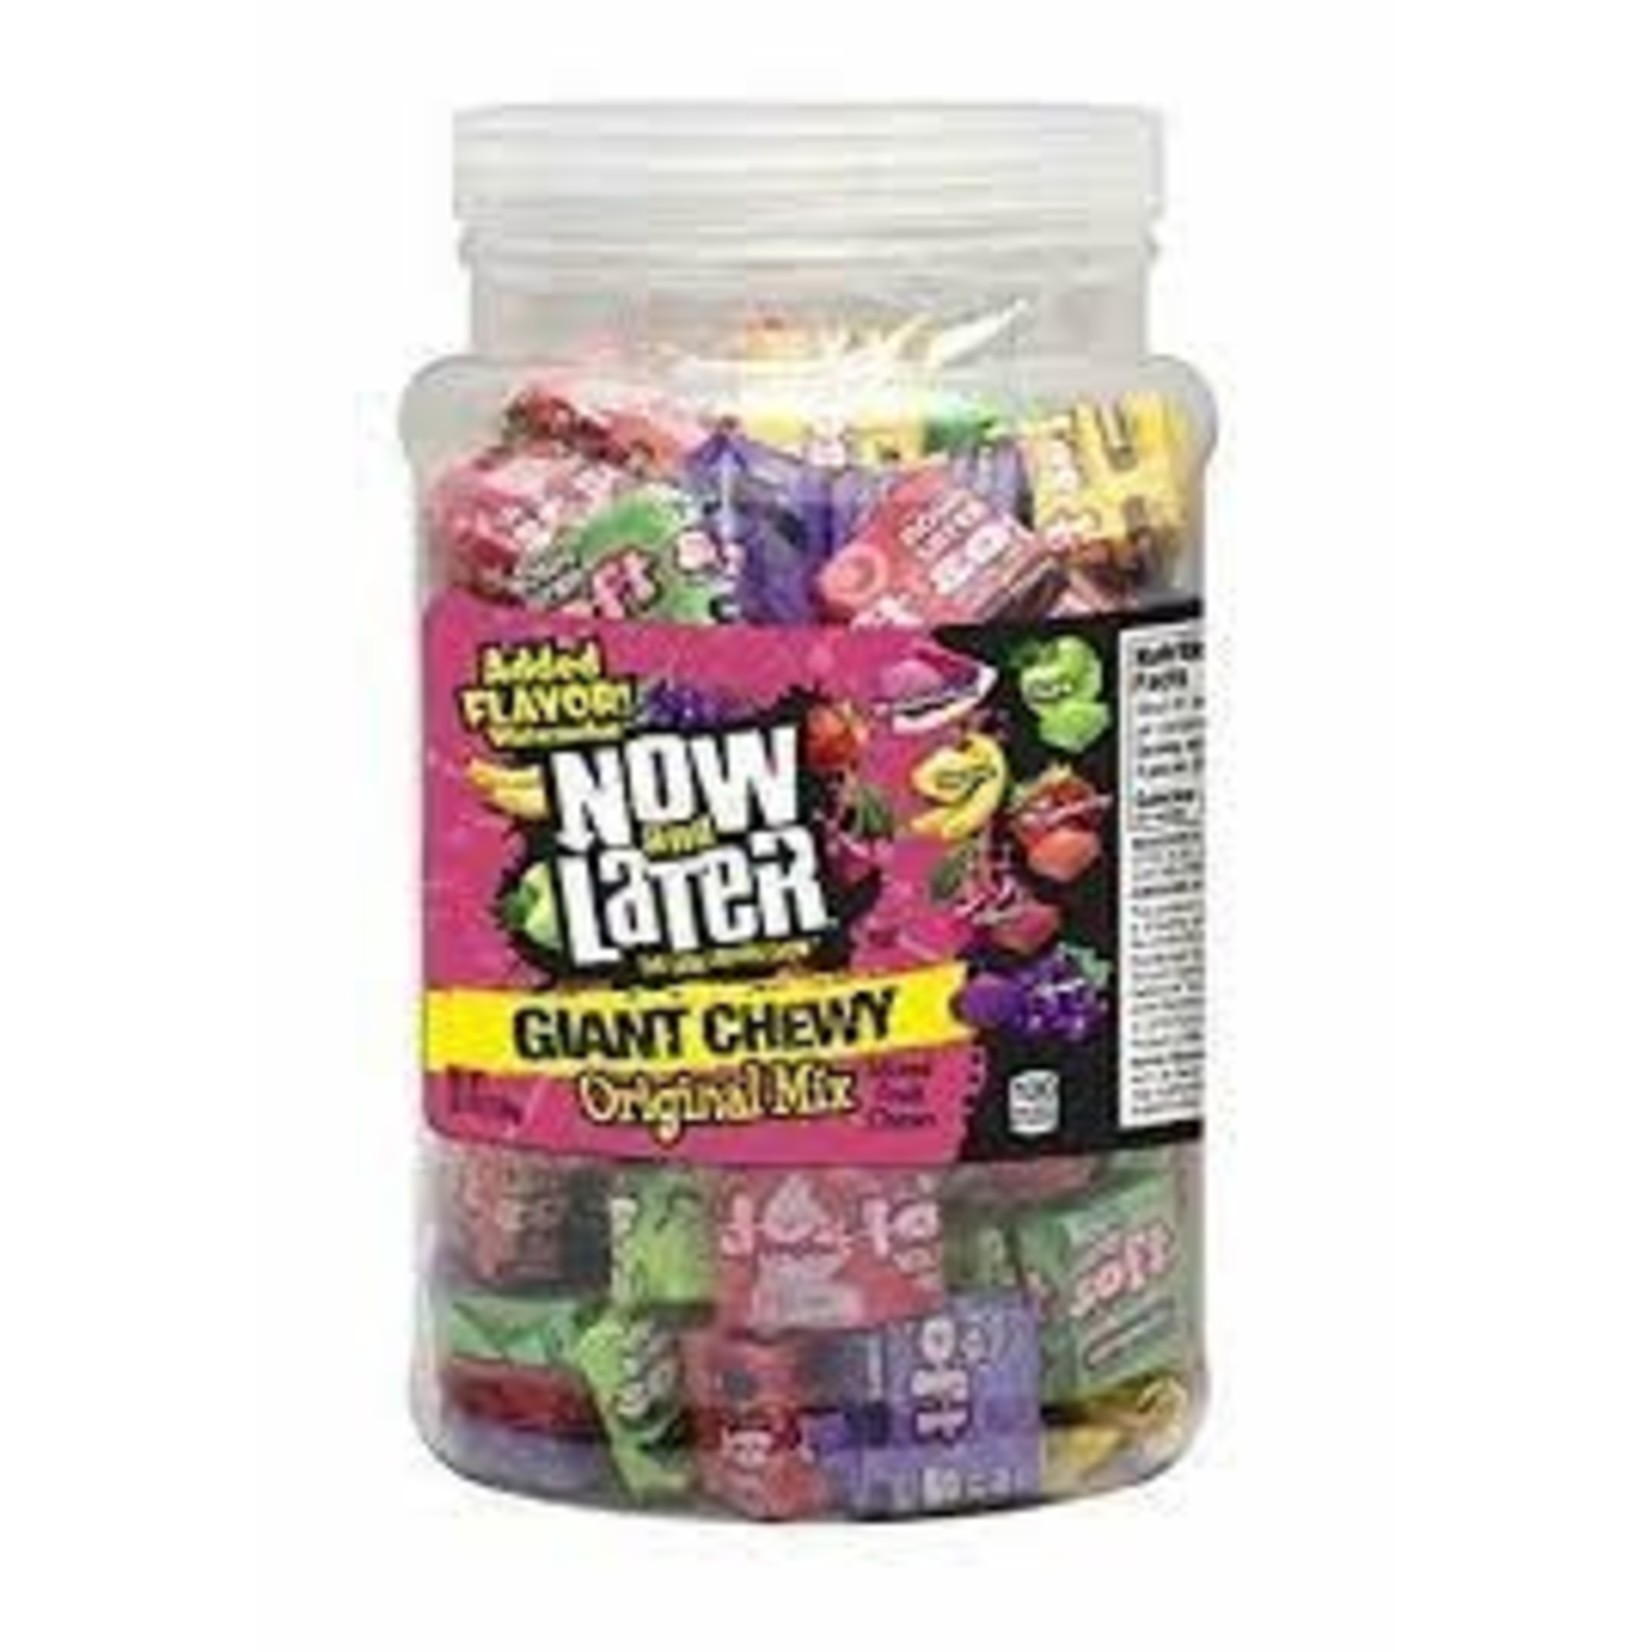 Now and Later Giant Chew Original Mix 38oz